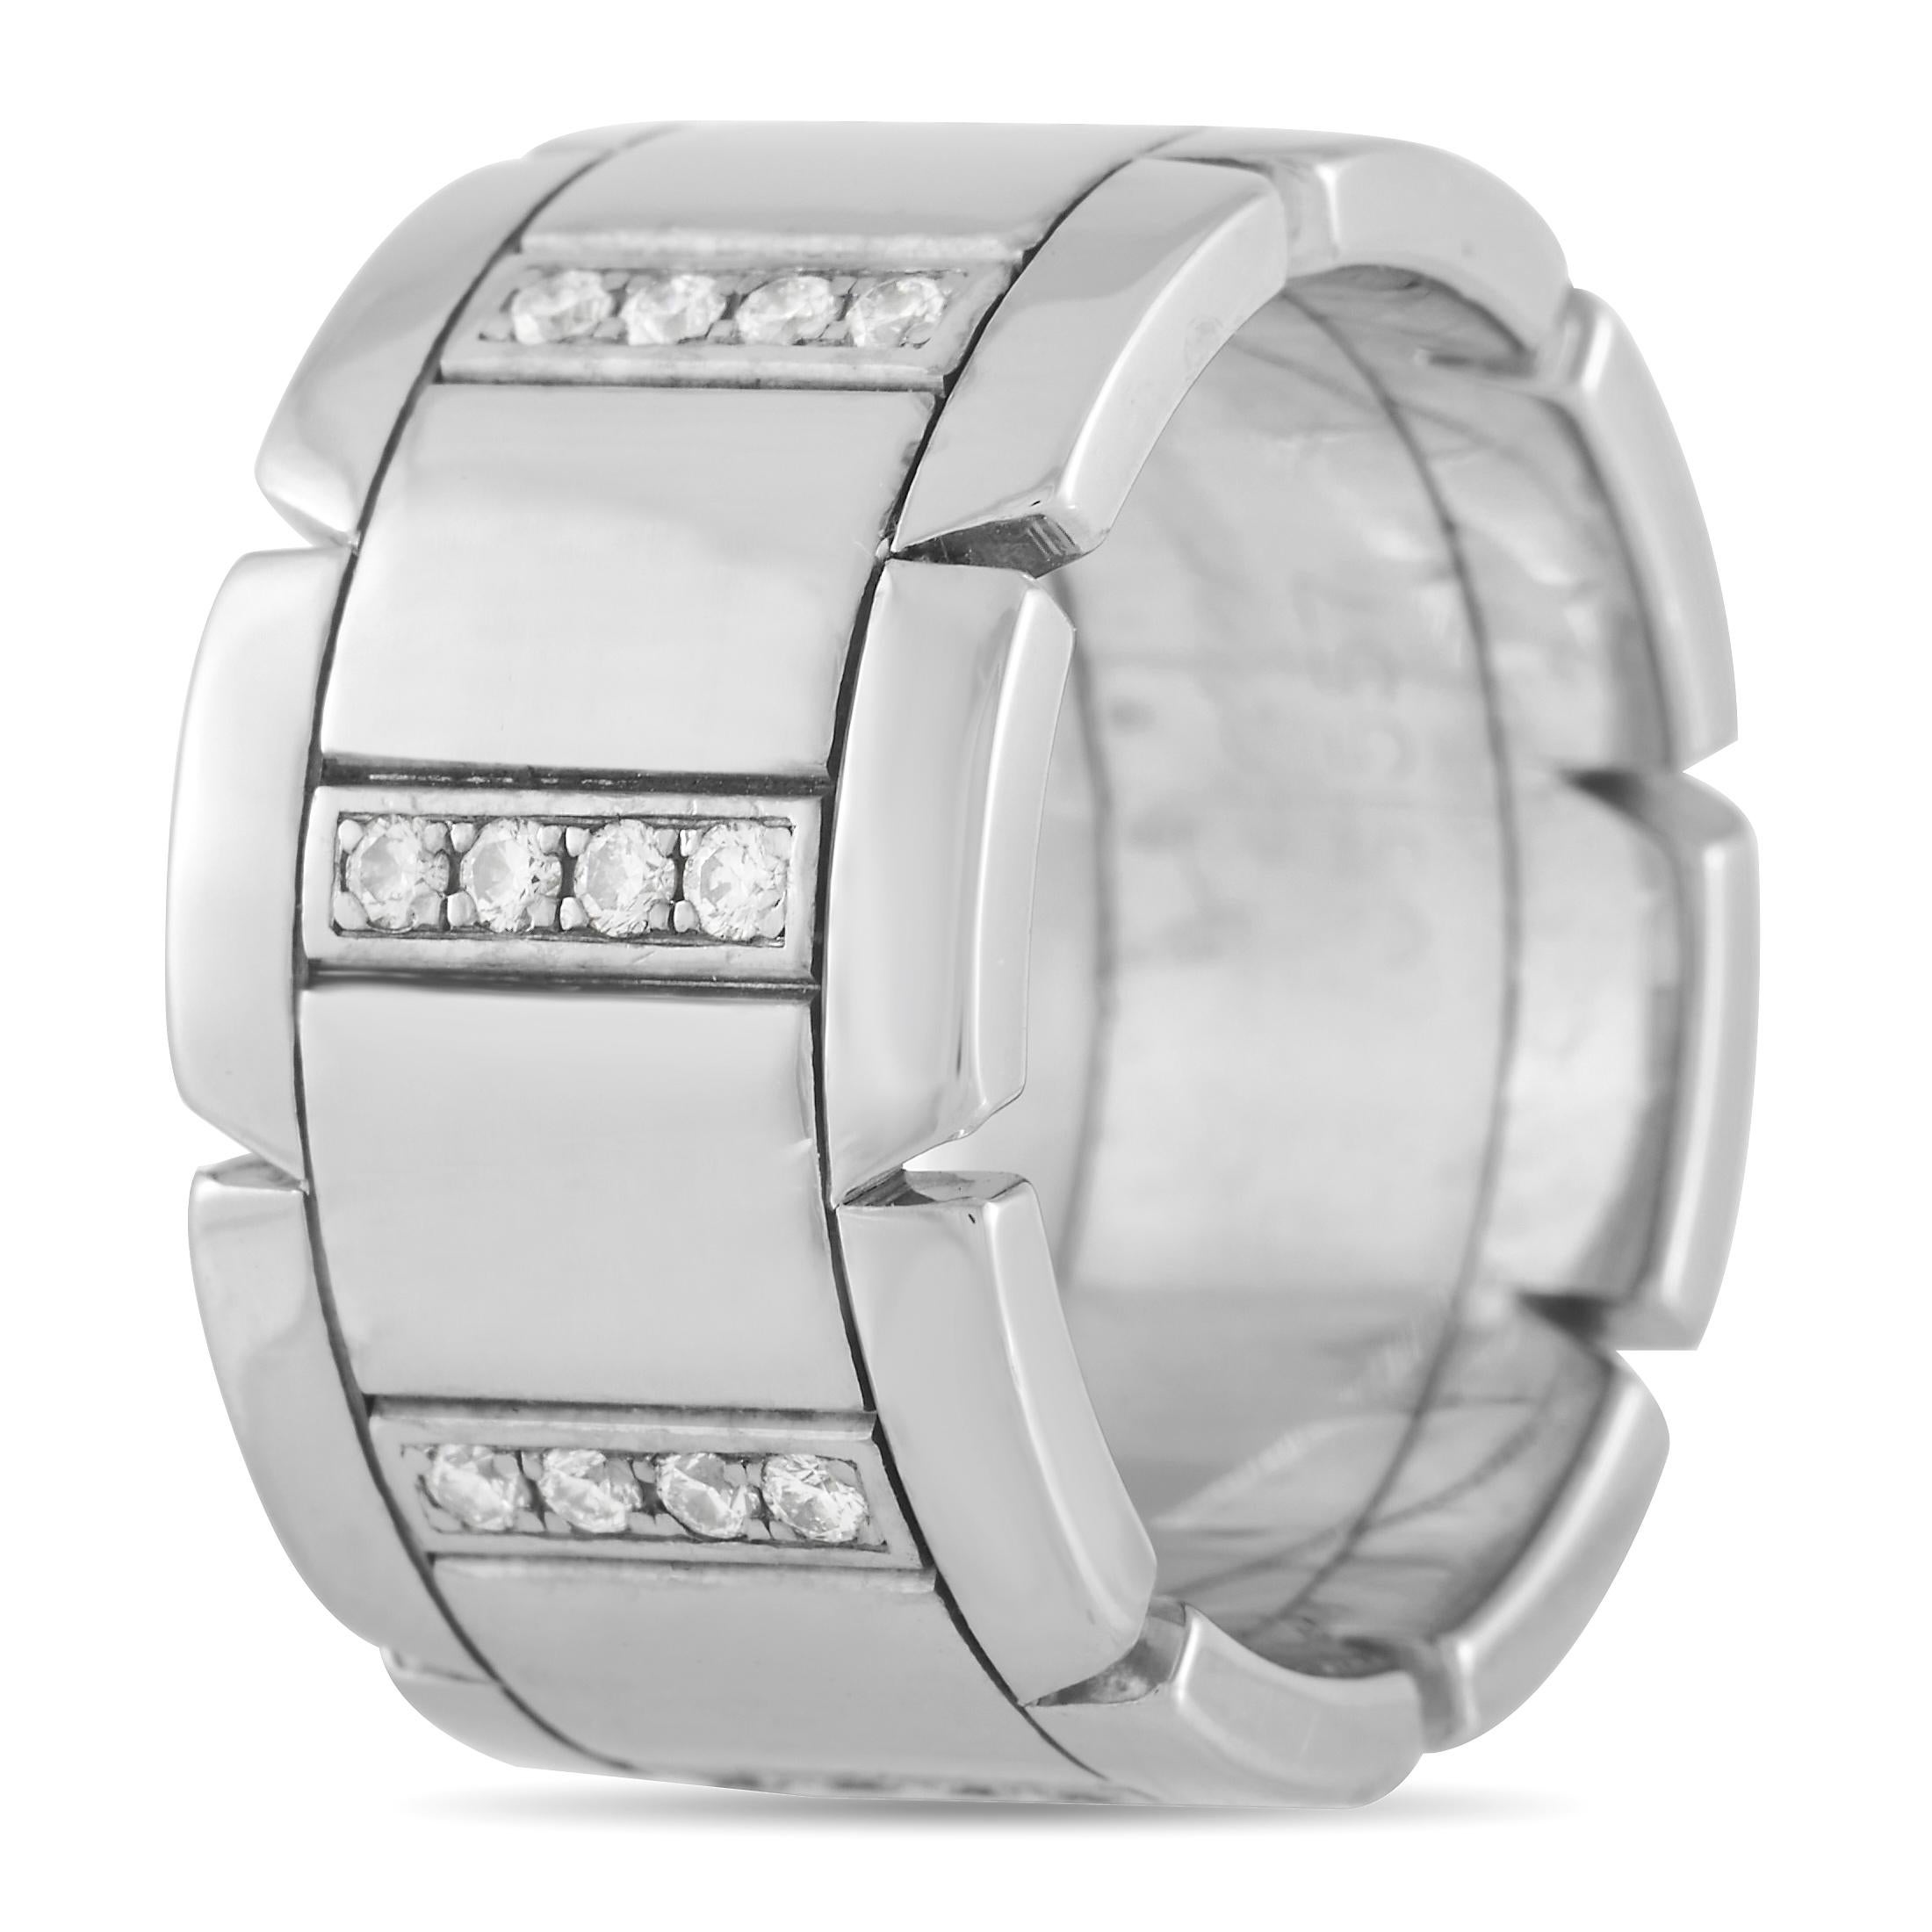 This Cartier Tank Francaise Band Ring is an exceptional piece that upholds the luxury brand’s commitment to excellence. The creative 18K White Gold setting measures 10mm wide and includes minimalist notches throughout for added visual interest. But